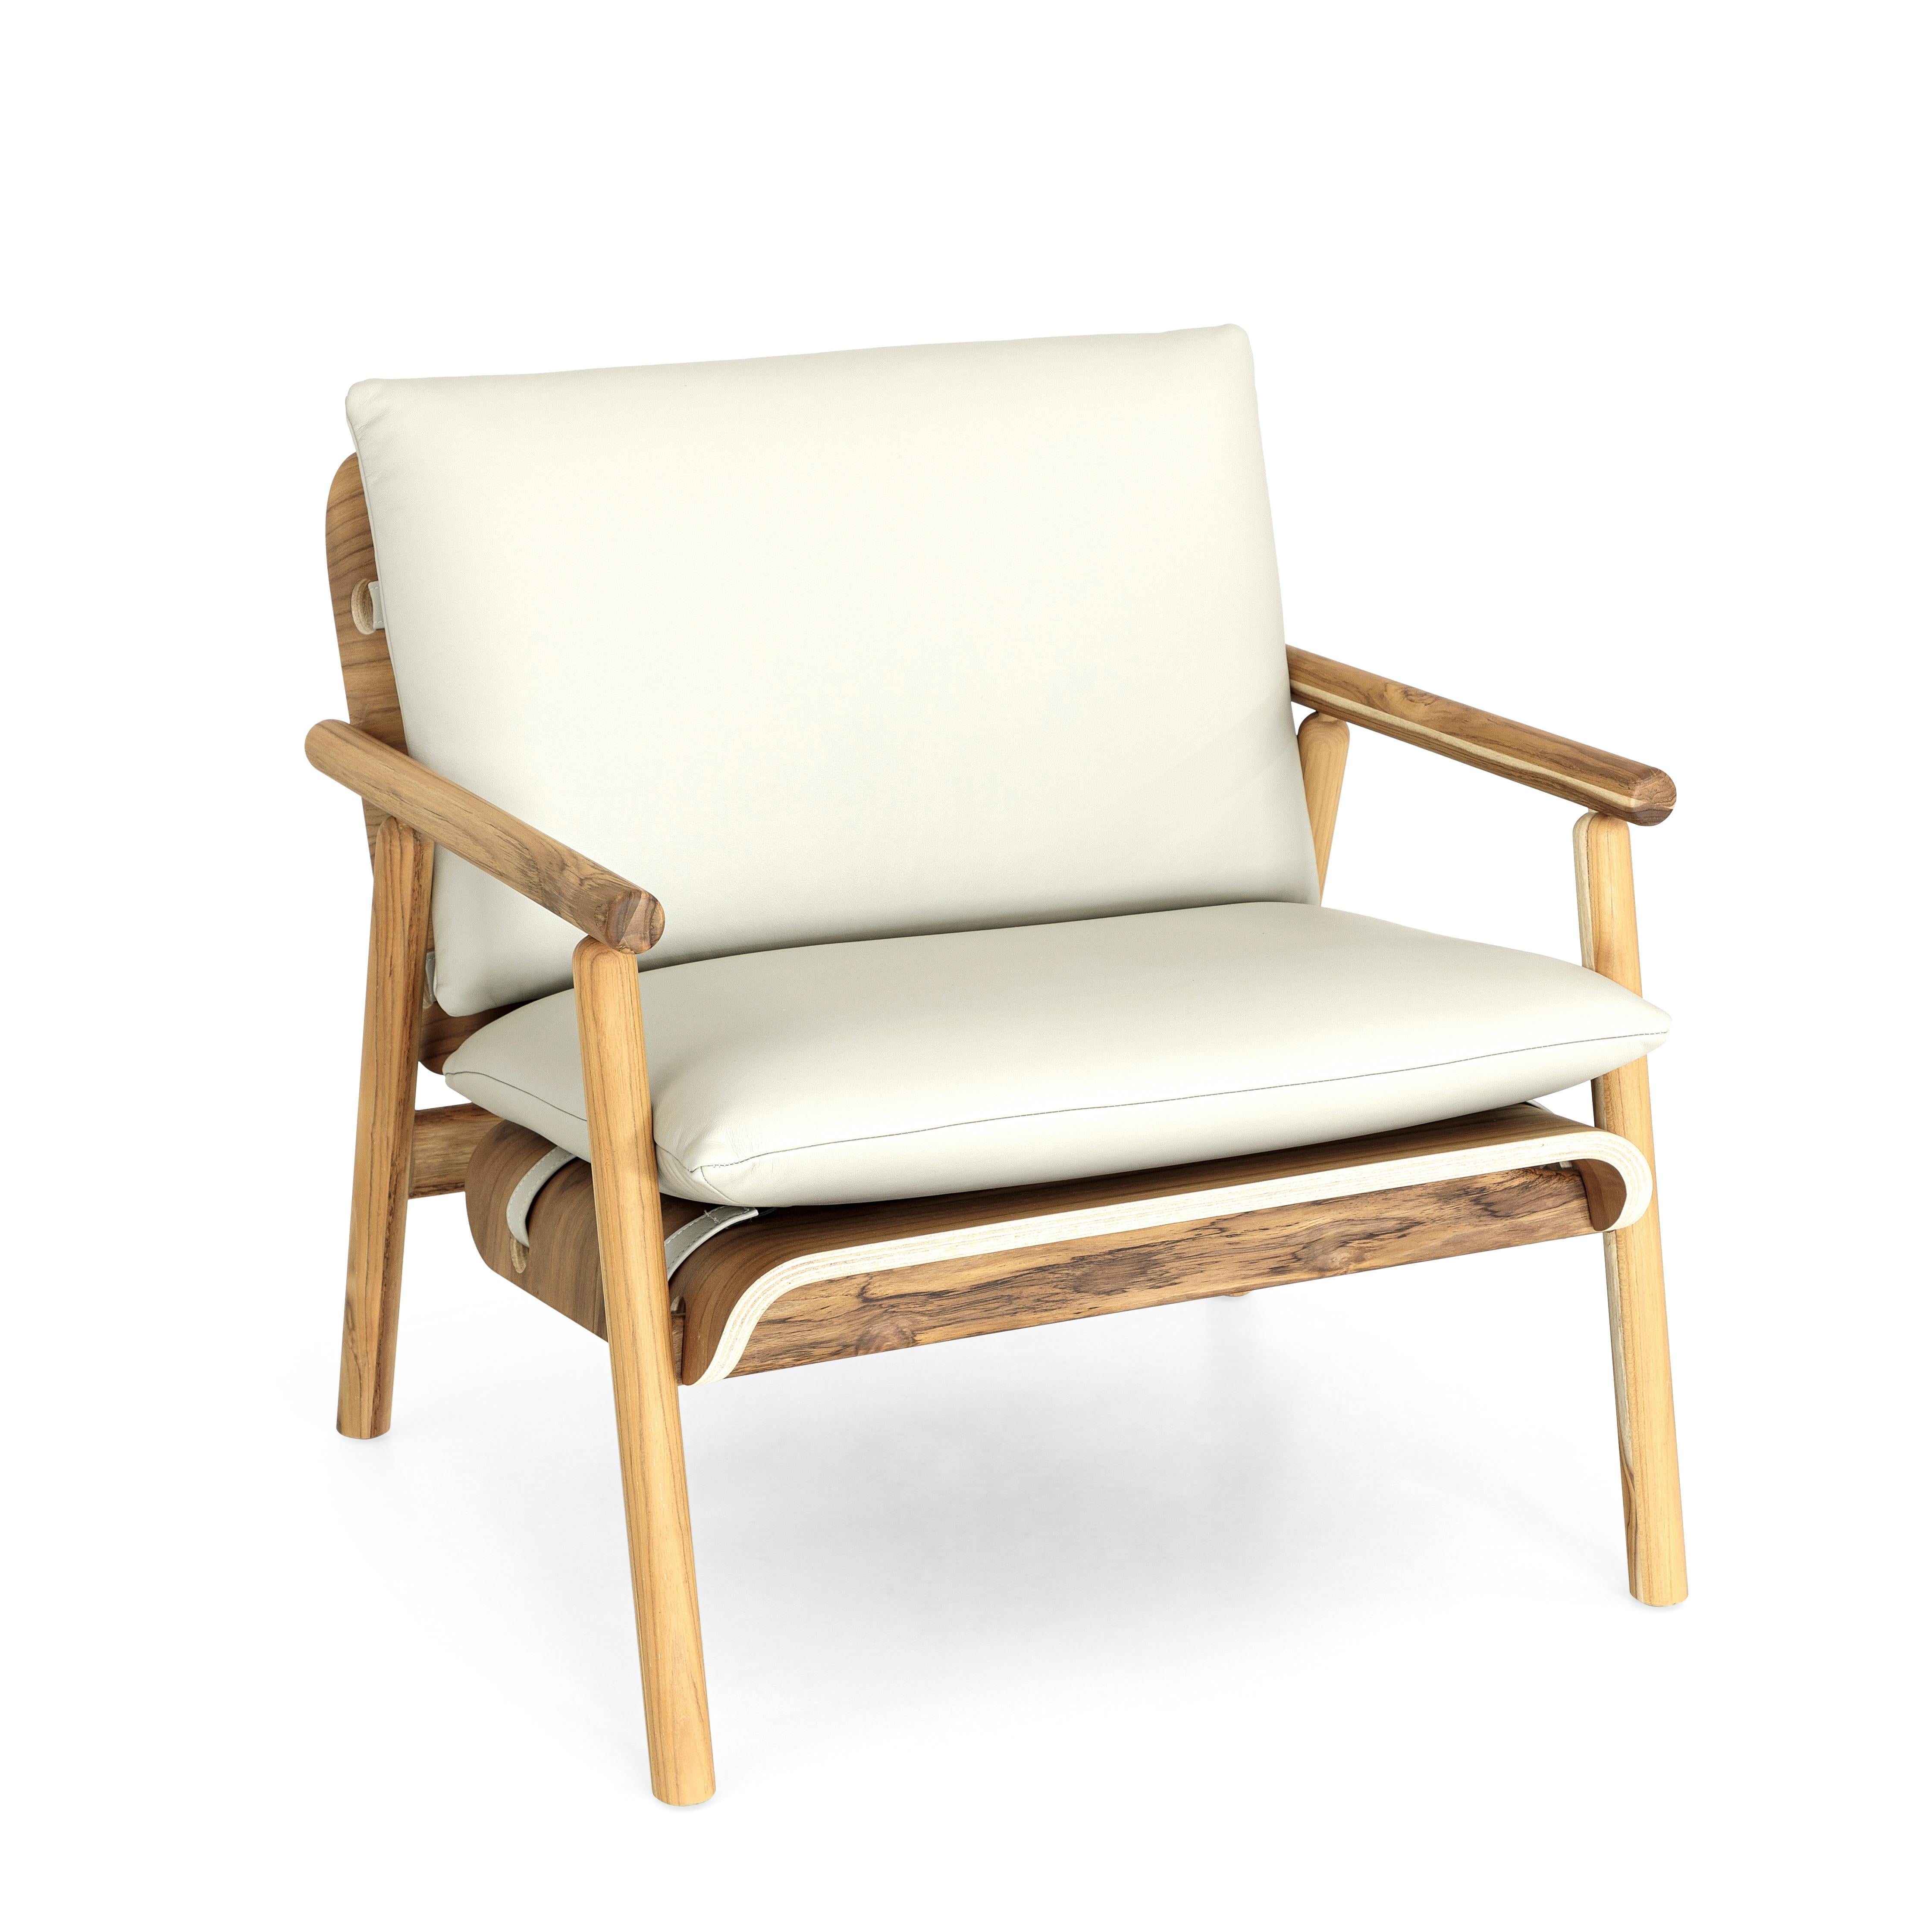 Brazilian Tai Armchair in Teak Wood Finish with Off-White Leather Cushions For Sale